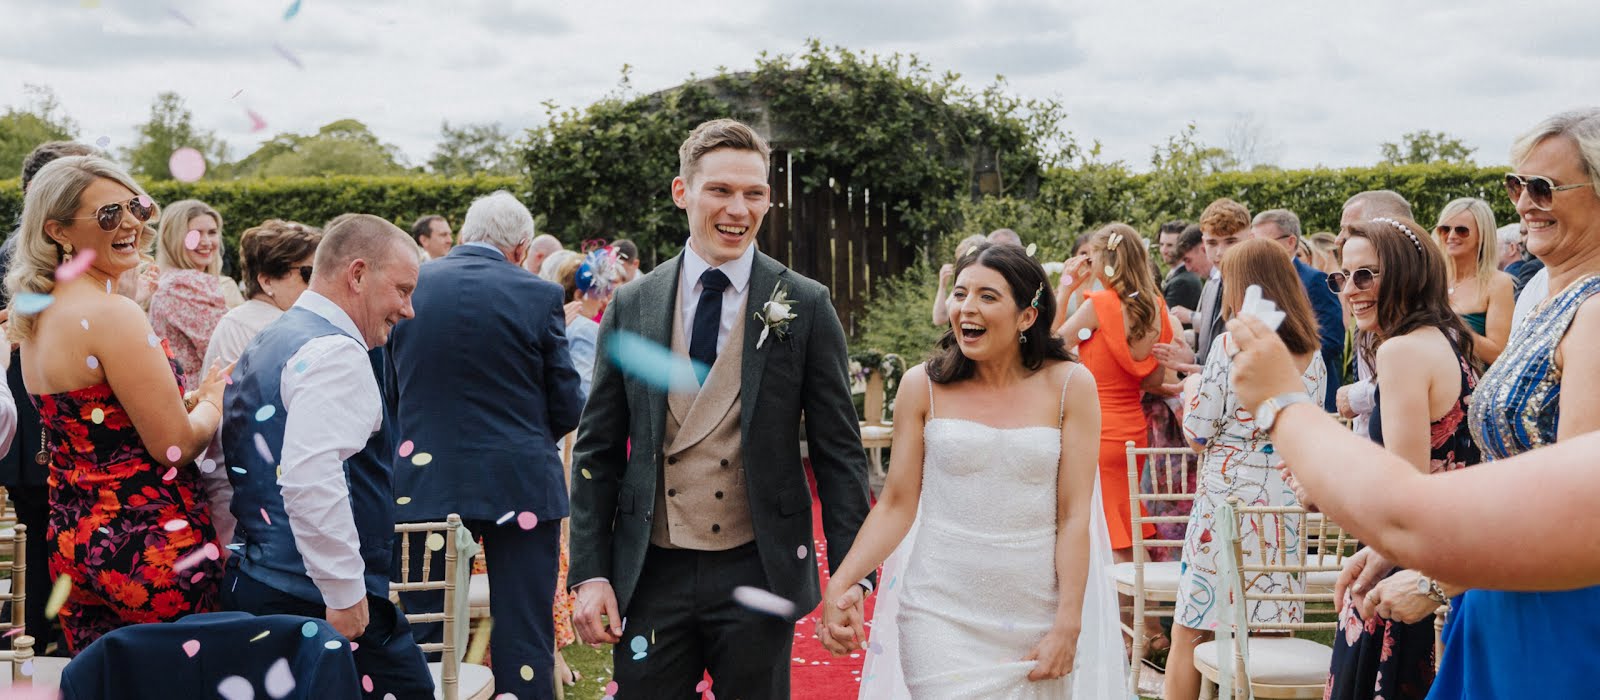 Real Weddings: Sade and John’s wedding at a charming estate in Co Meath